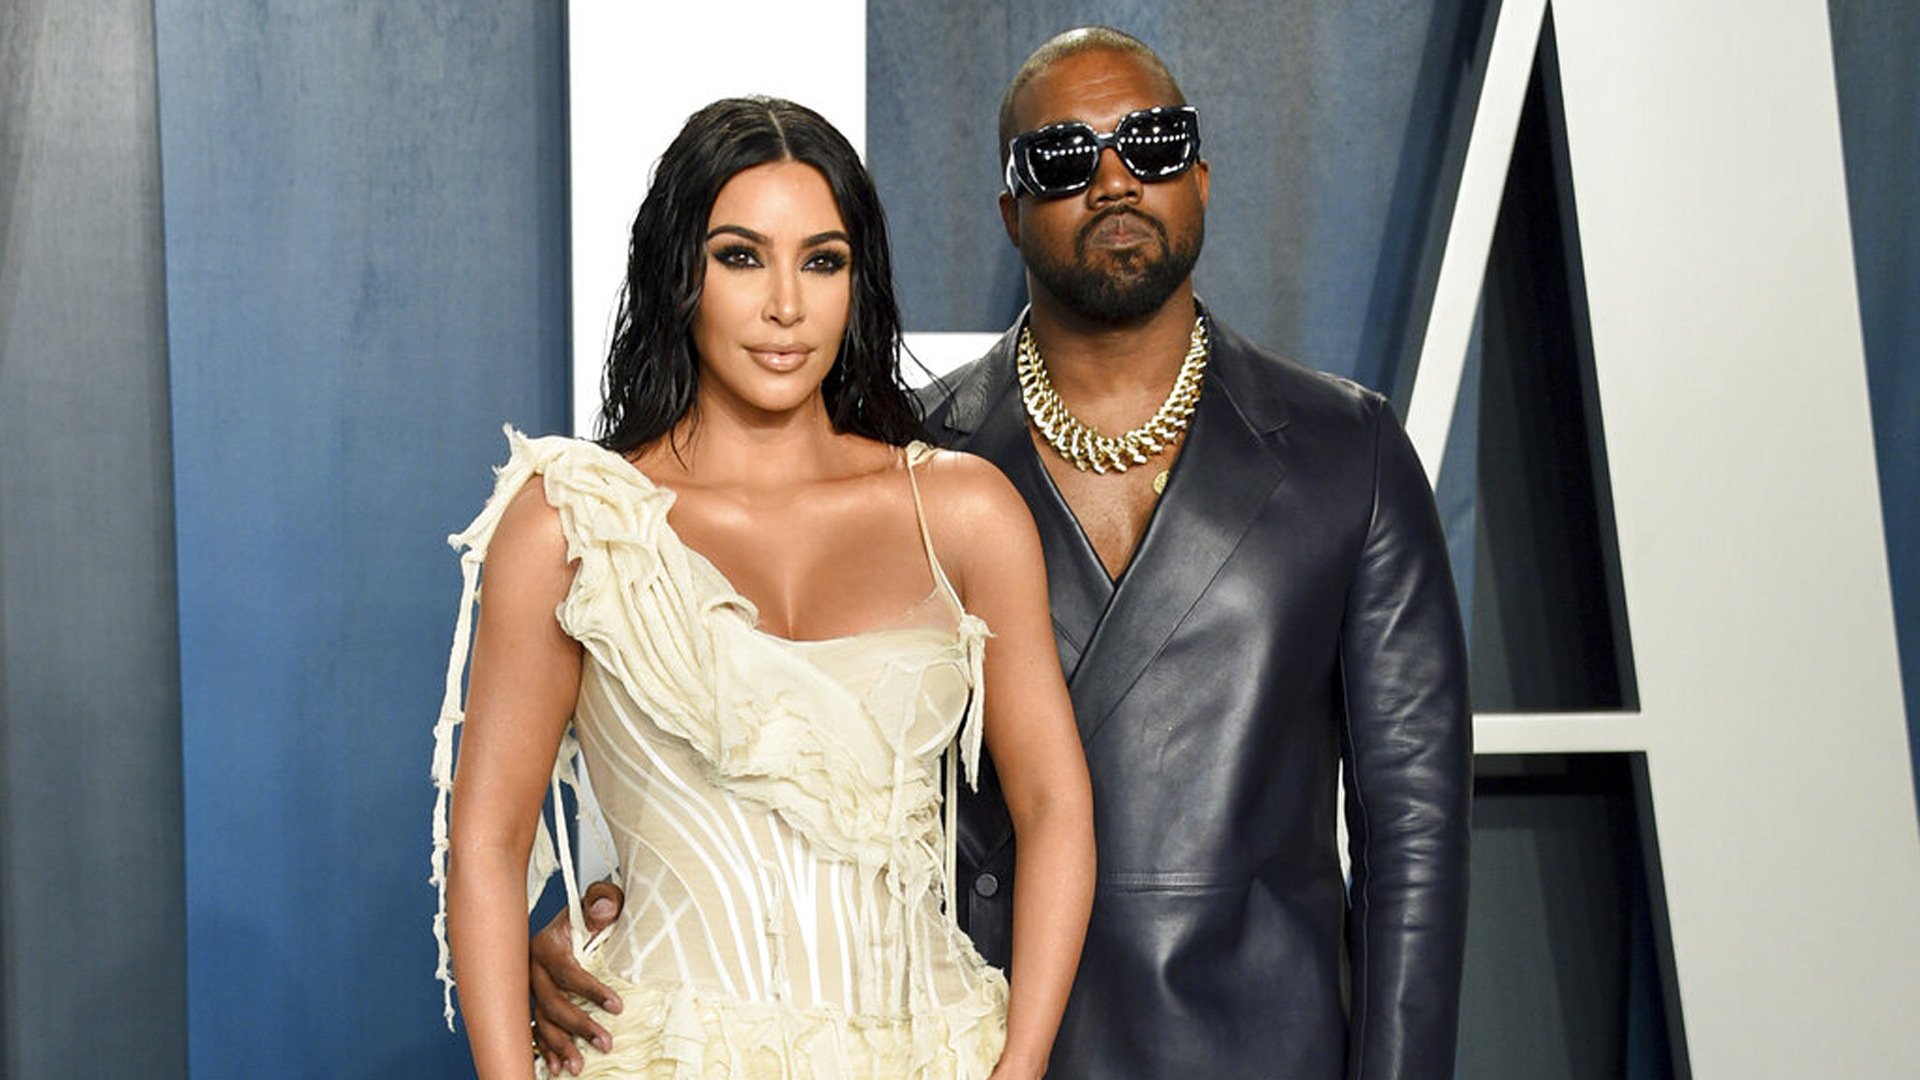 Kim Kardashian receives hologram of her father as 40th birthday present from Kanye West | WKRN News 2